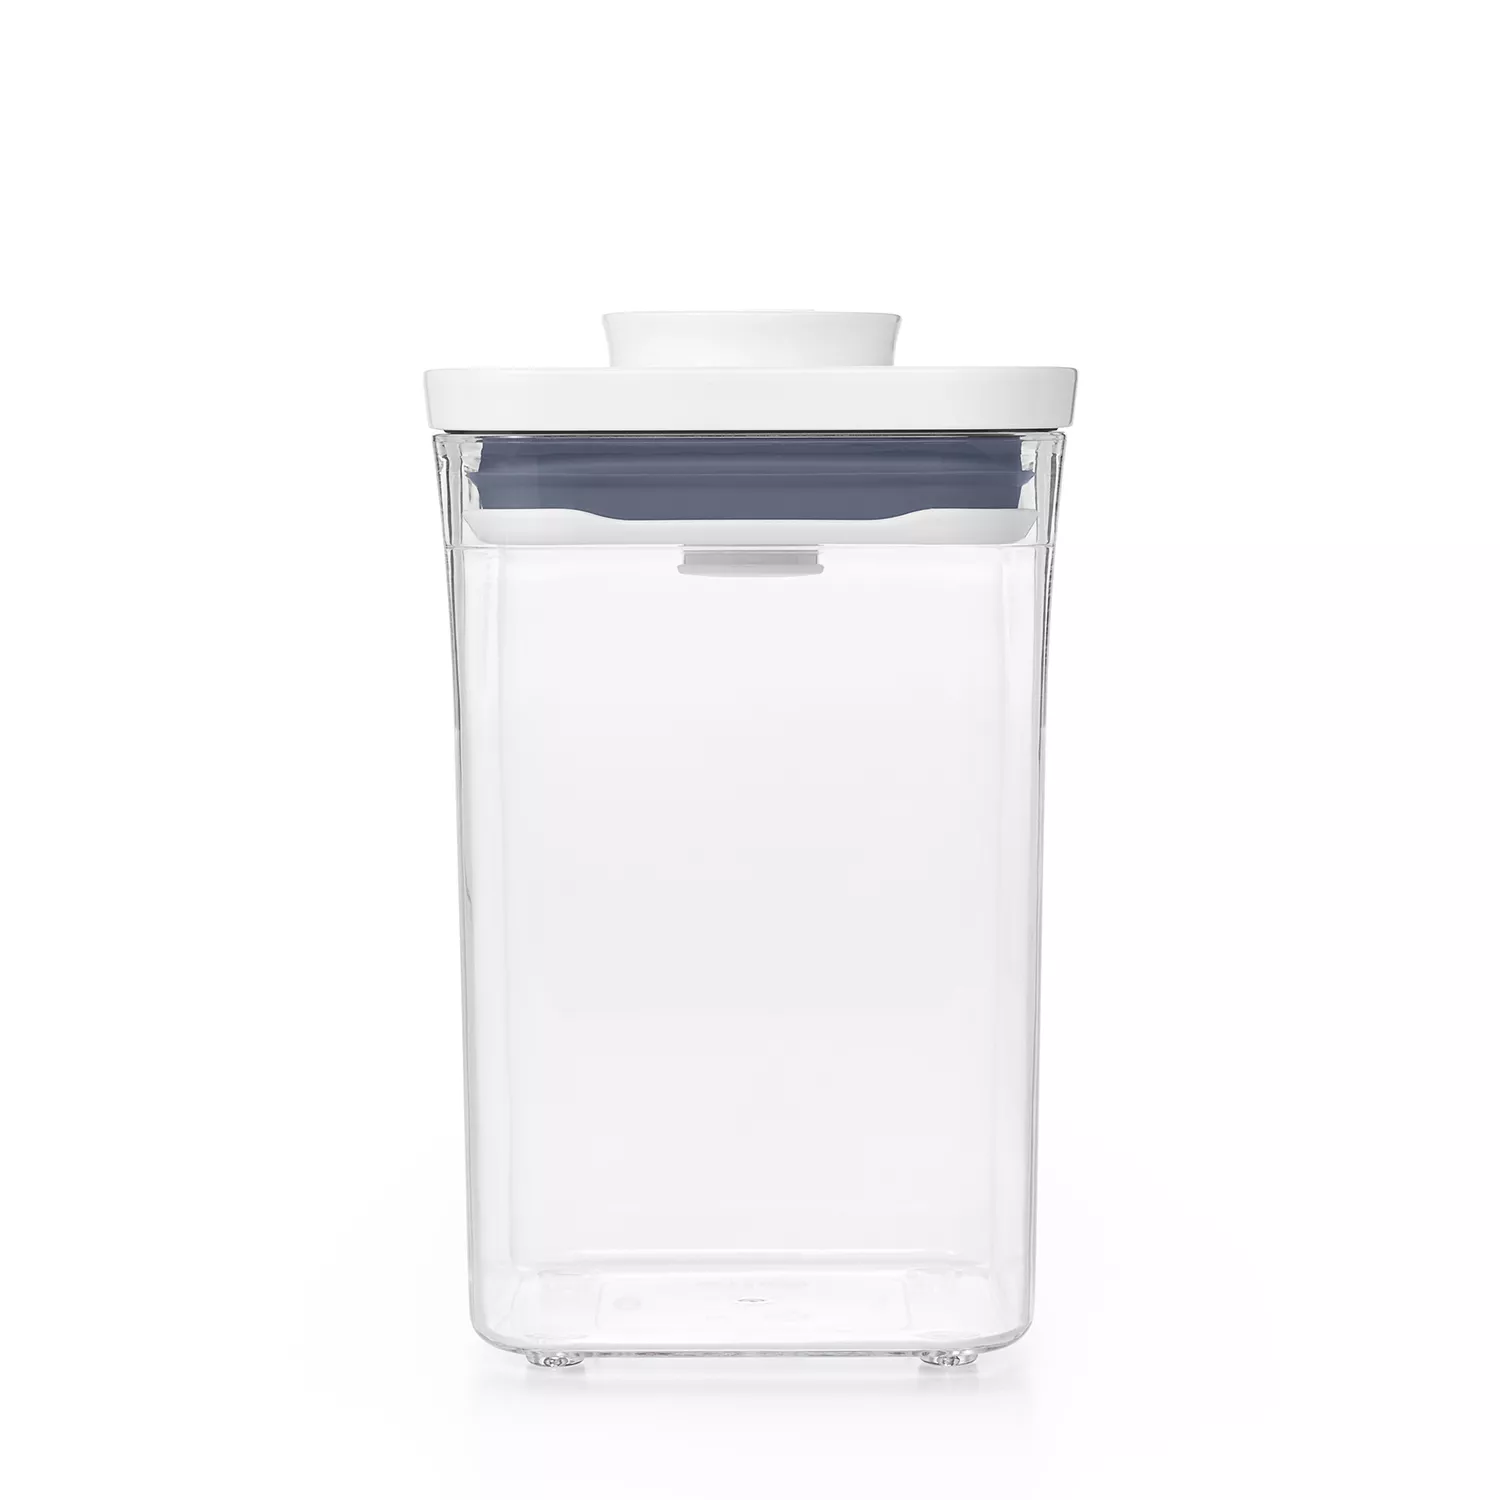 OXO Good Grips New POP Container, Small Square Short, 1.1 qt